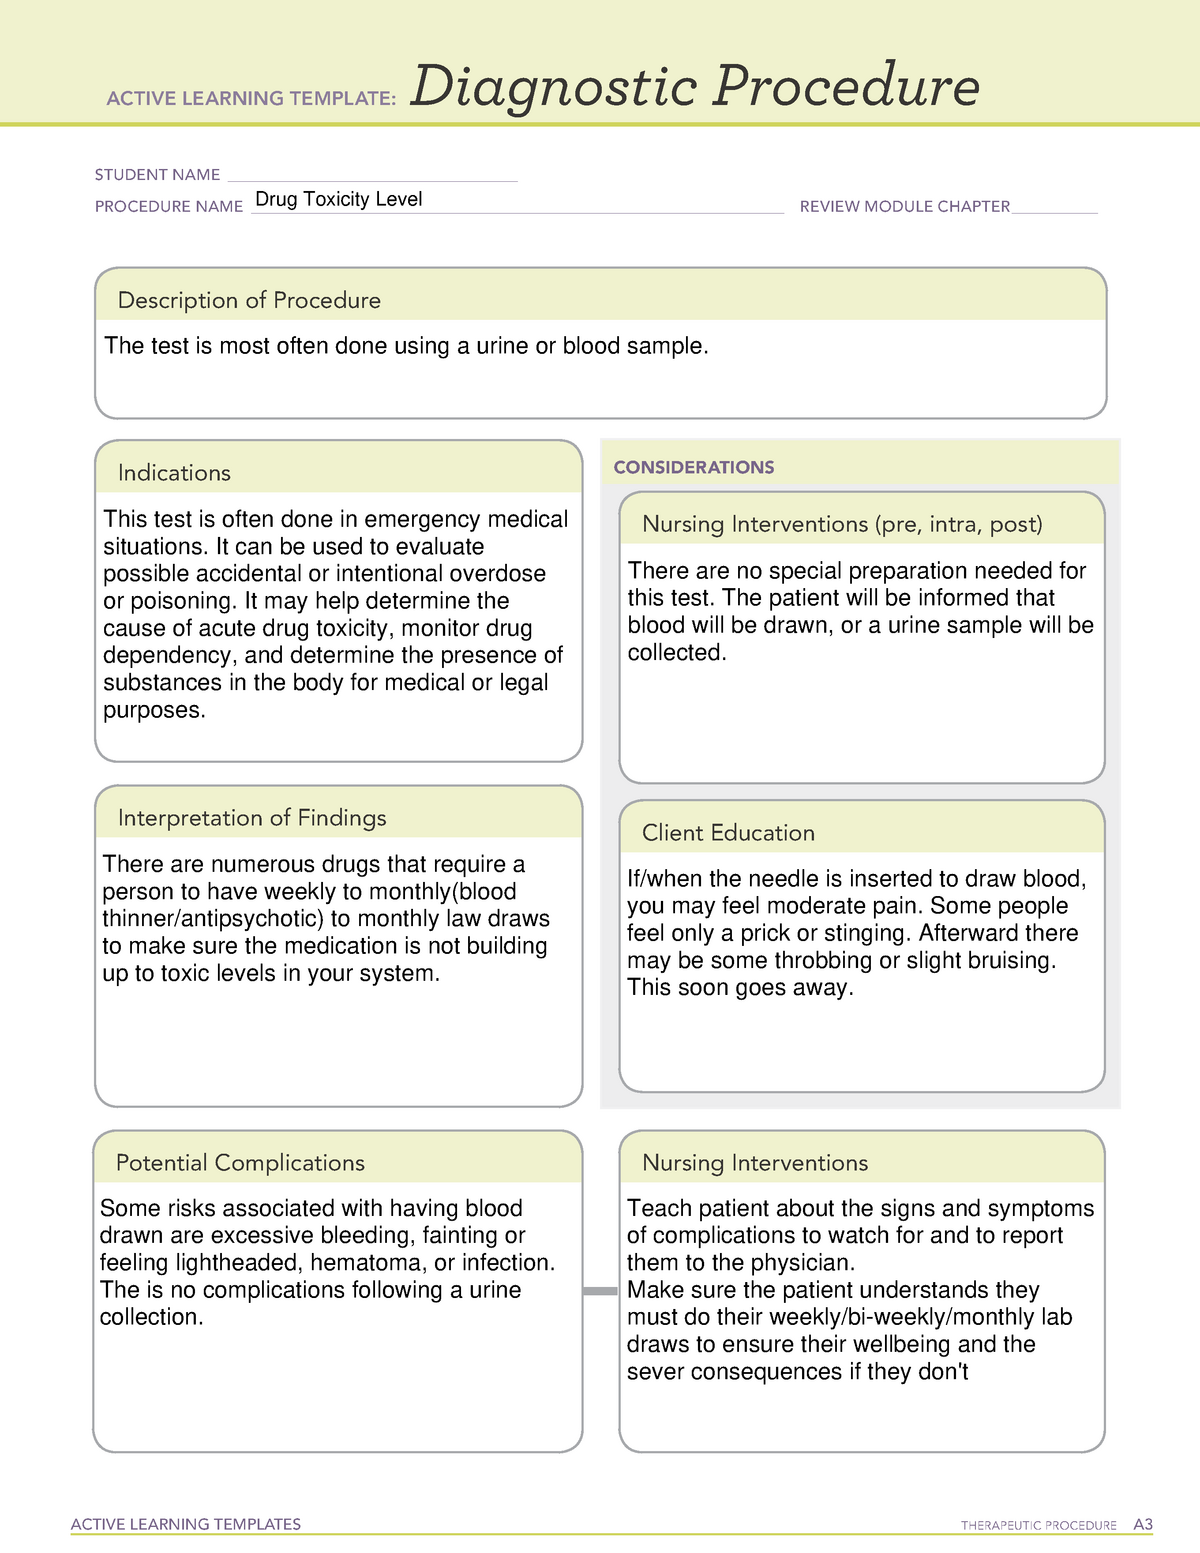 ATI Drug Toxicity Level Diagnostic Procedure Sheet - ACTIVE LEARNING ...